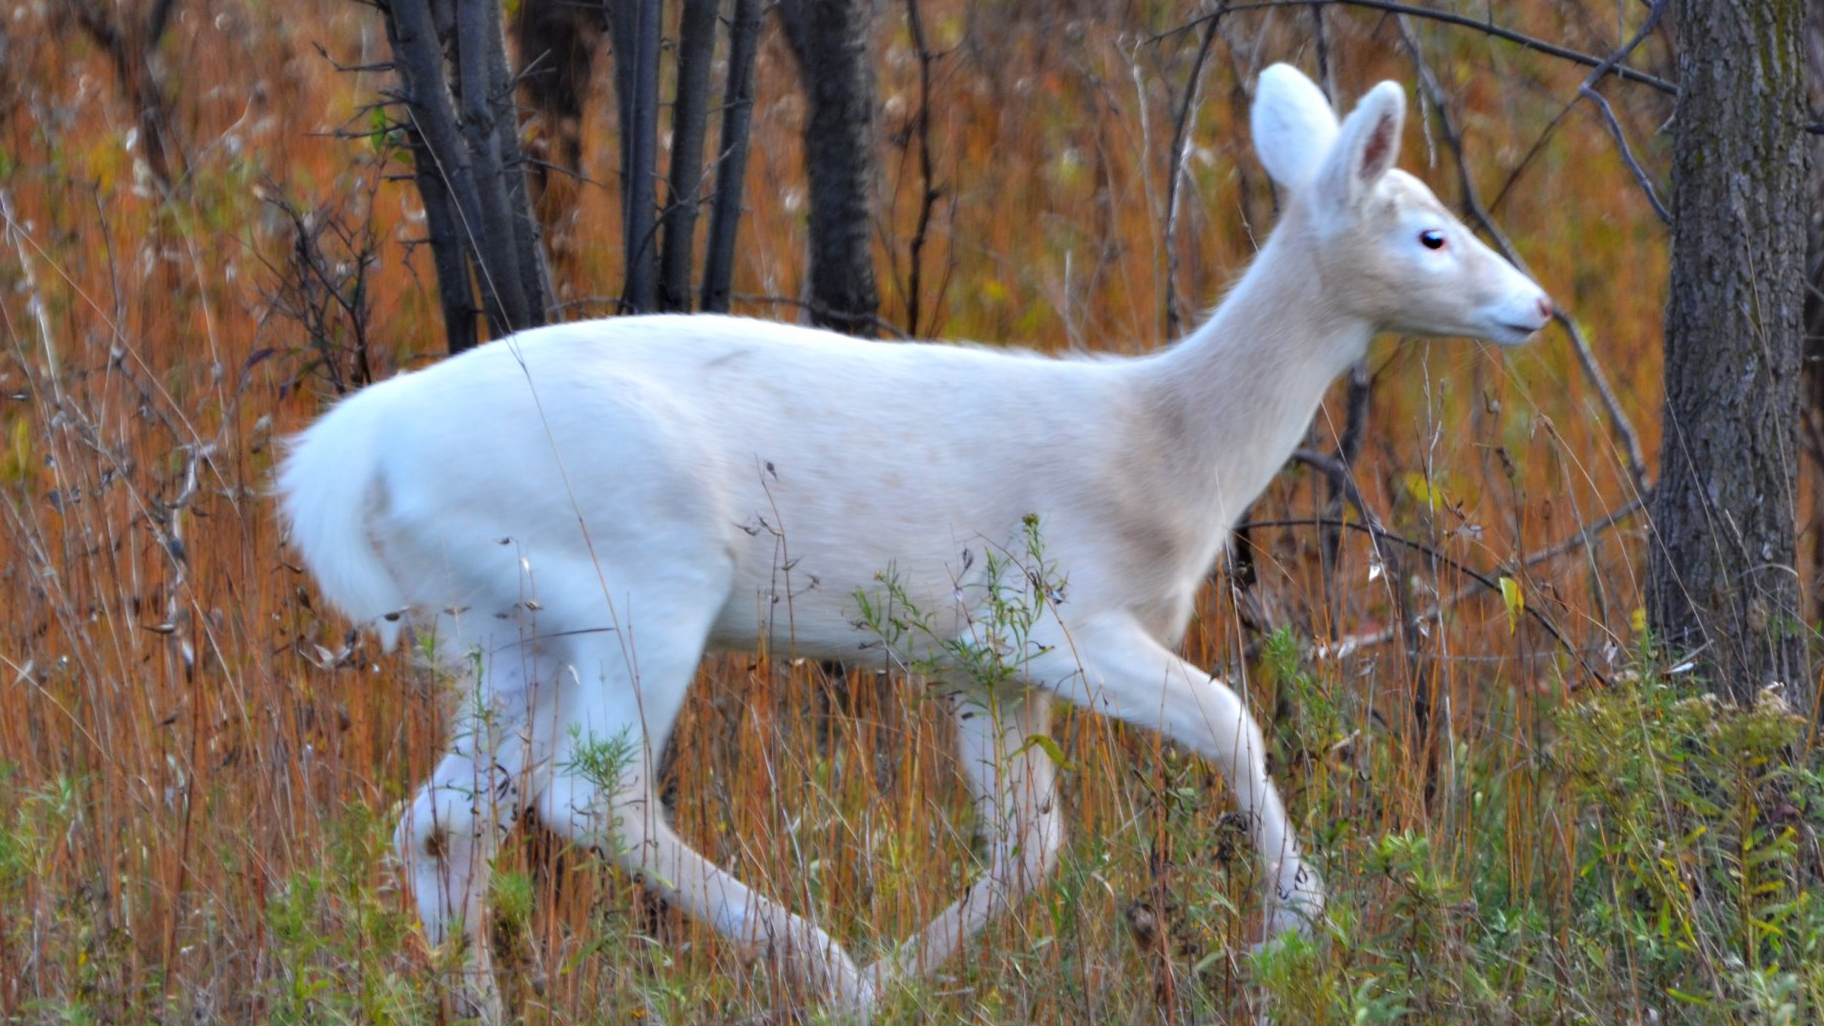 A piebald deer at the Seneca Army Depot in New York. Photo © blmiers2 / Flickr through a Creative Commons license